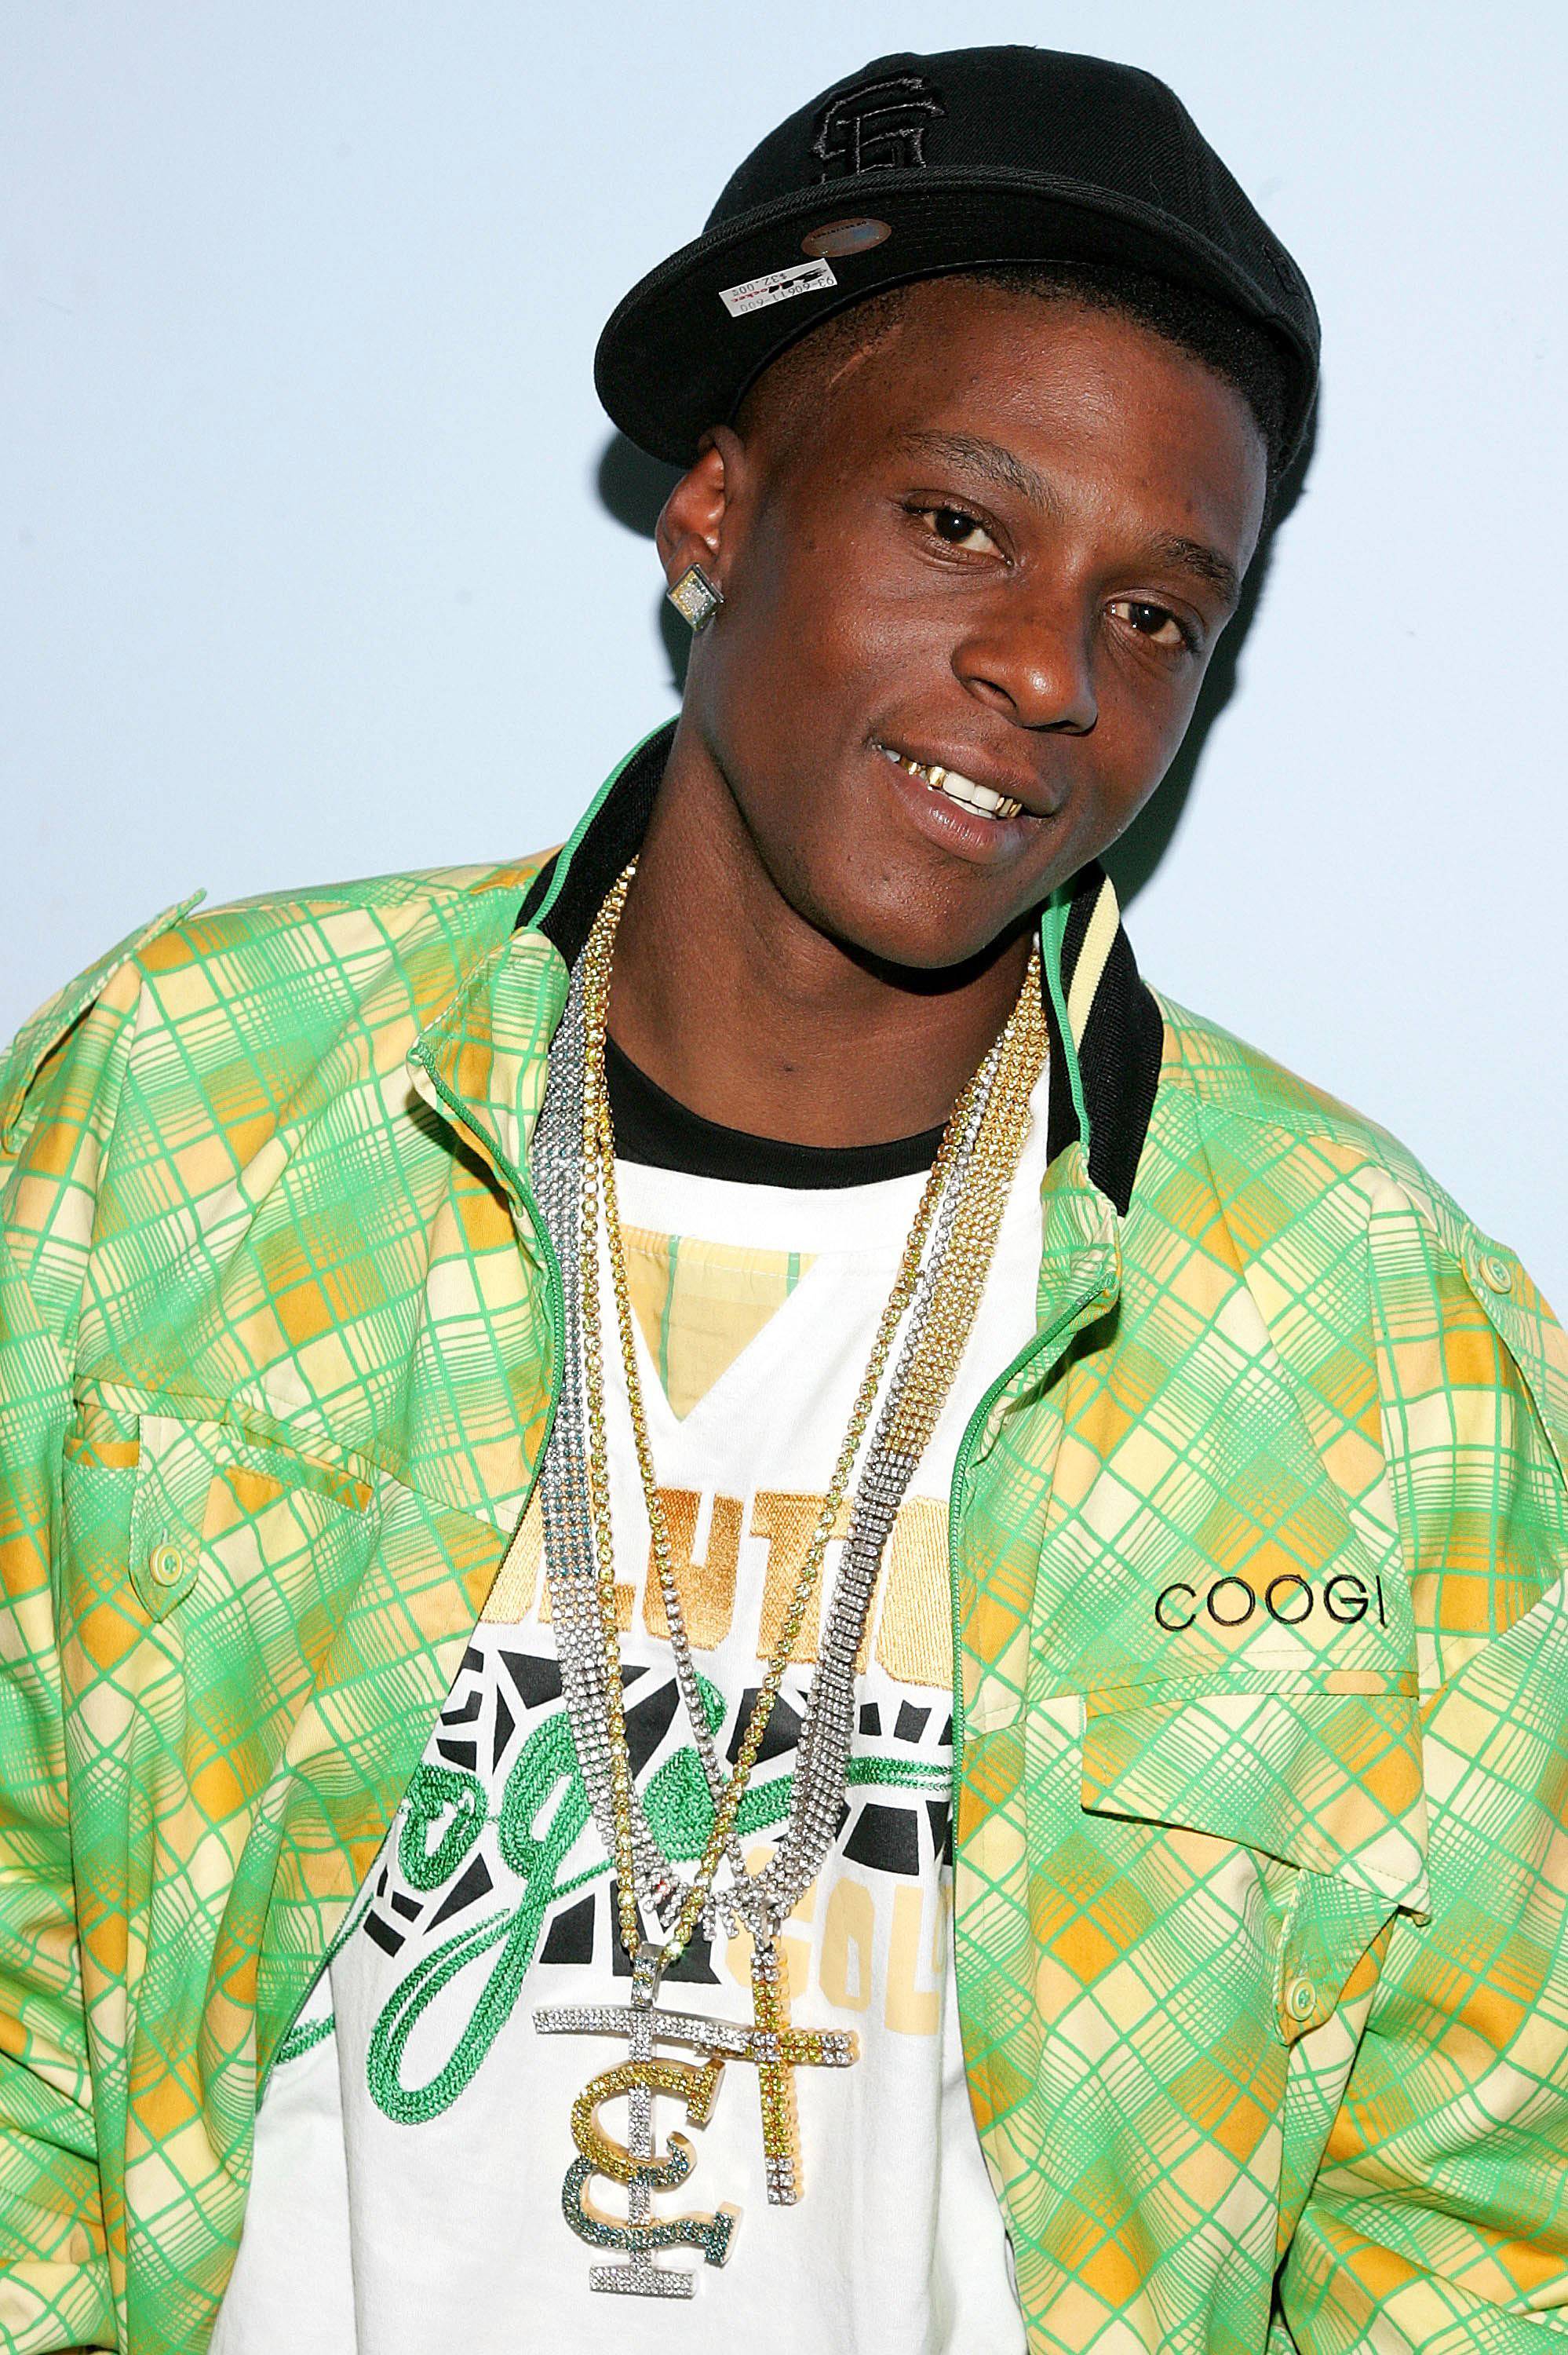 Lil' Boosie in a Letter to Fans From Prison&nbsp; - “Last month I was sentence to 8 years with credit for time served so i will have to do 19 months on that sentence. I go to trial for this murder charge in April so please keep me in your prayers.”&nbsp;(Photo: Bryan Bedder/Getty Images)